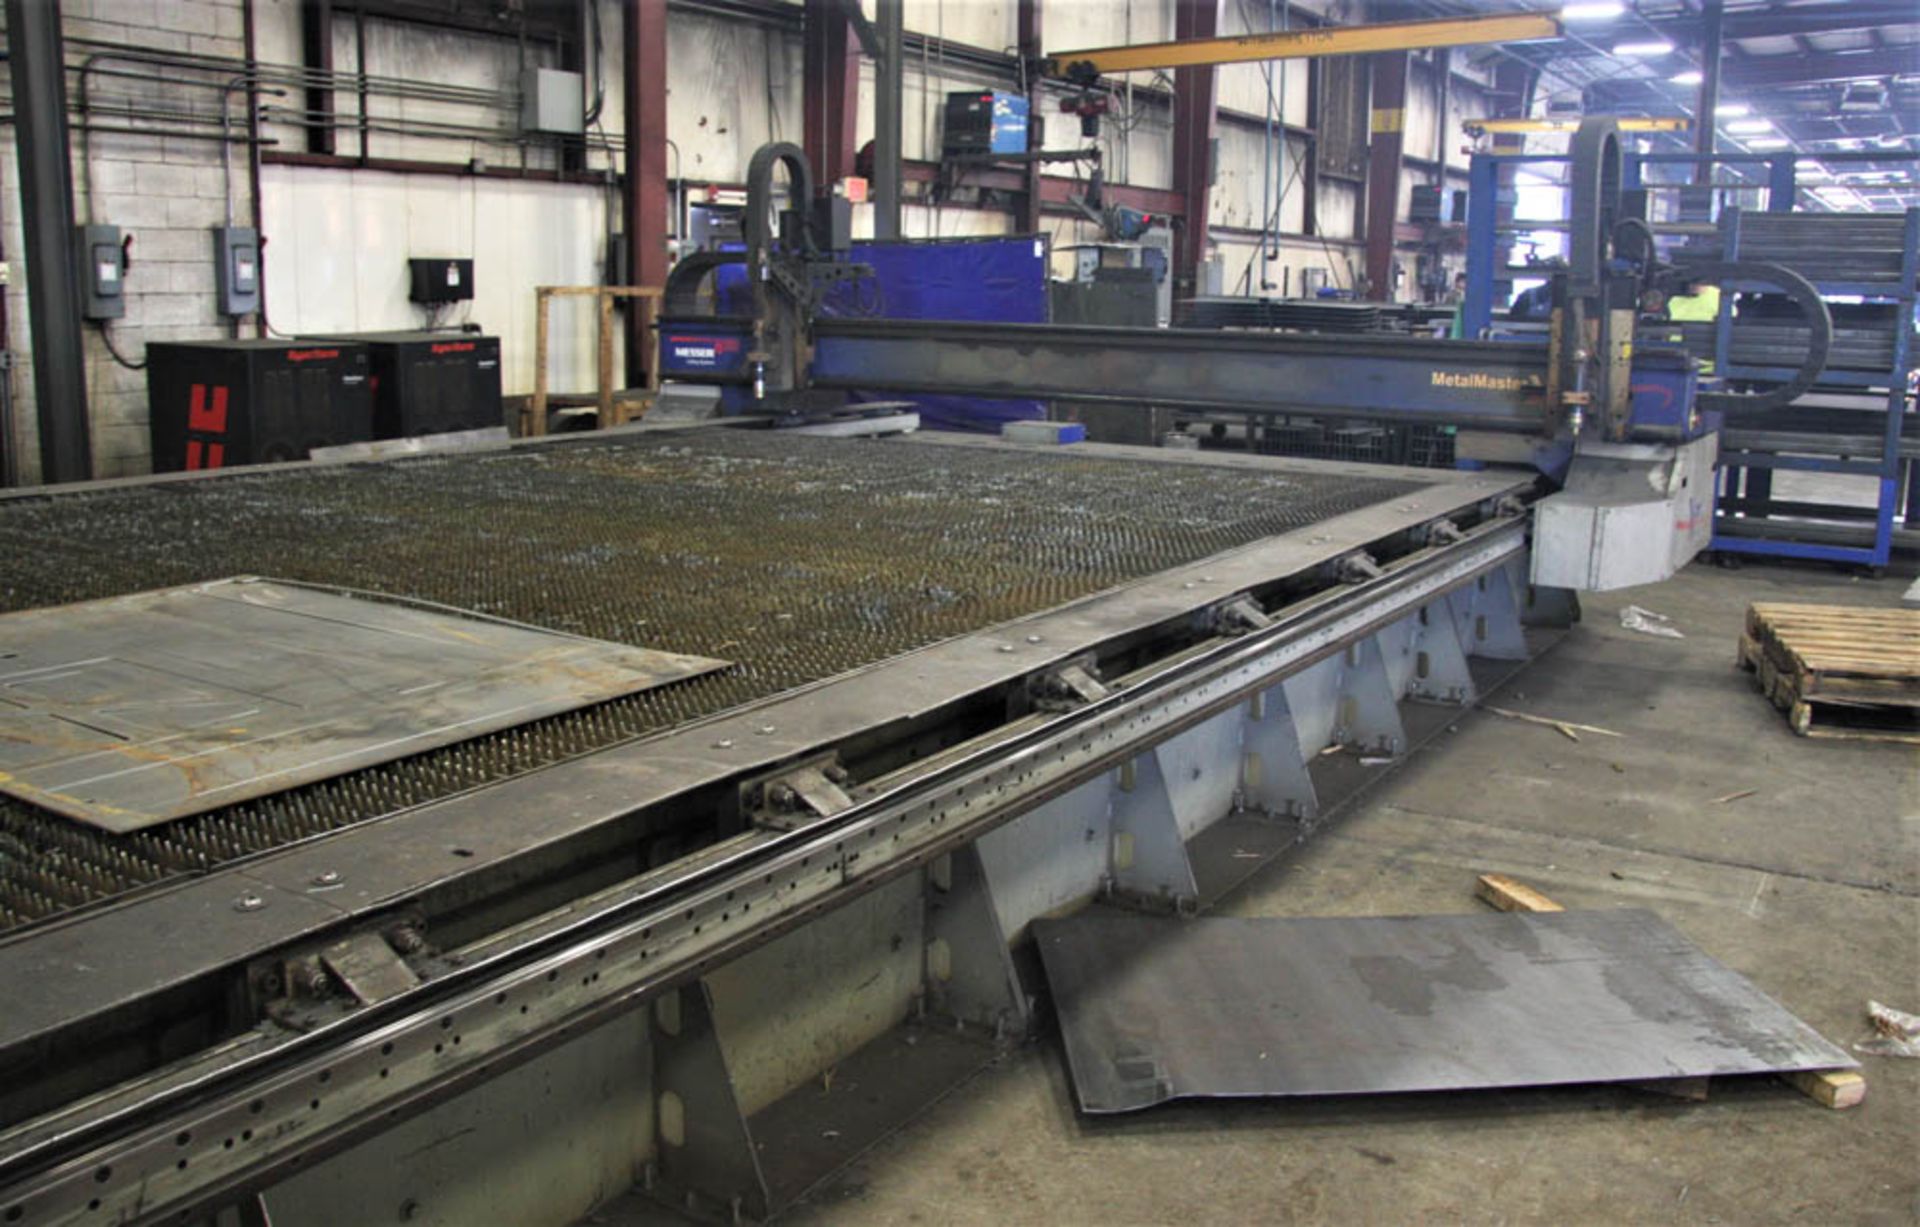 2015 MESSER MDL. MMEXCEL HI-DEF CNC PLASMA CUTTING TABLE, [2] HEADS, 140" X 324" OVERALL TABLE SIZE,